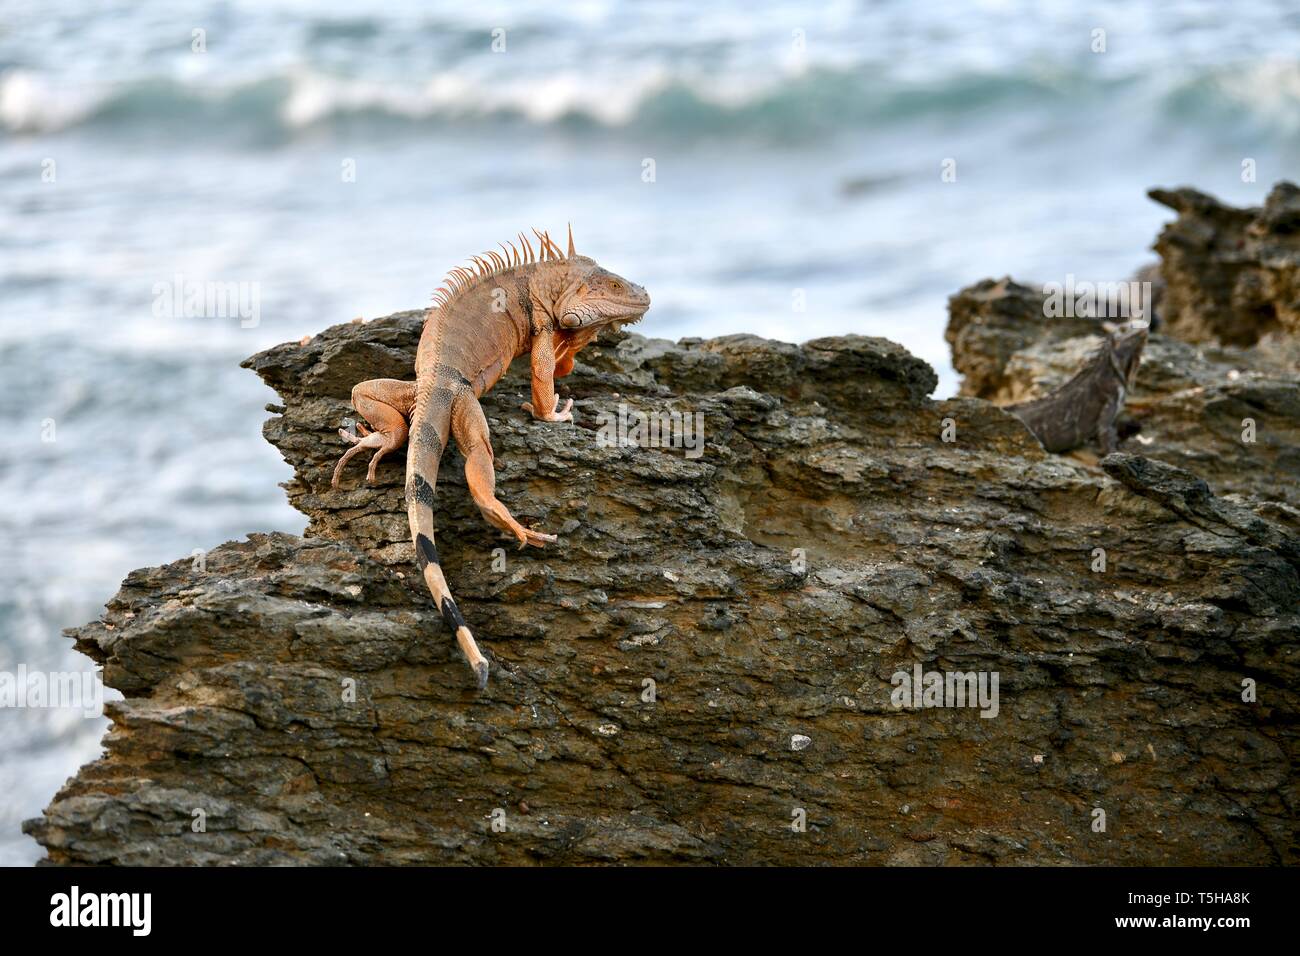 Iguana on a rocky shore in St. Croix, United States Virgin Islands Stock Photo